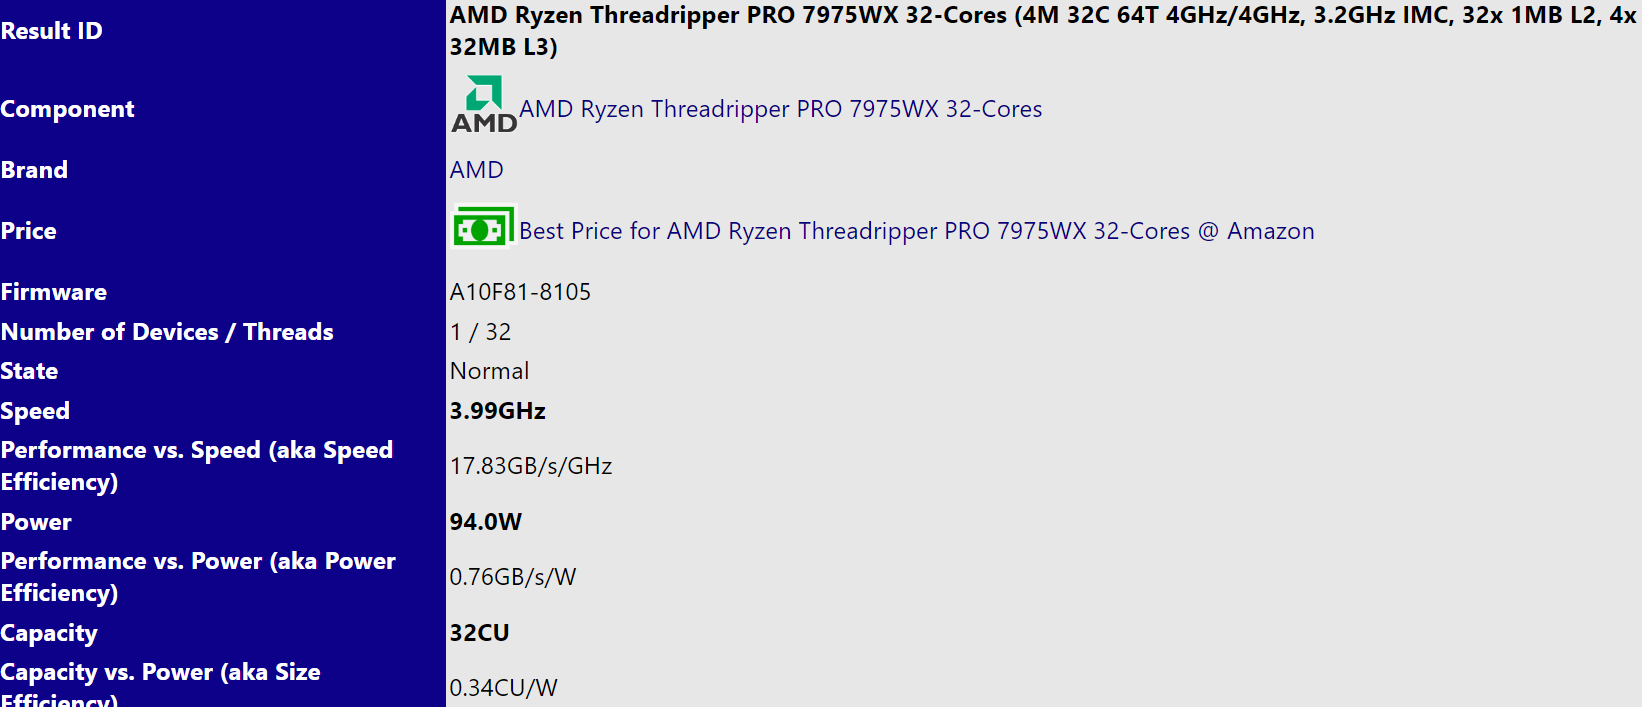 AMD talks Threadripper: How it works, who should buy it, and what's that  price again?